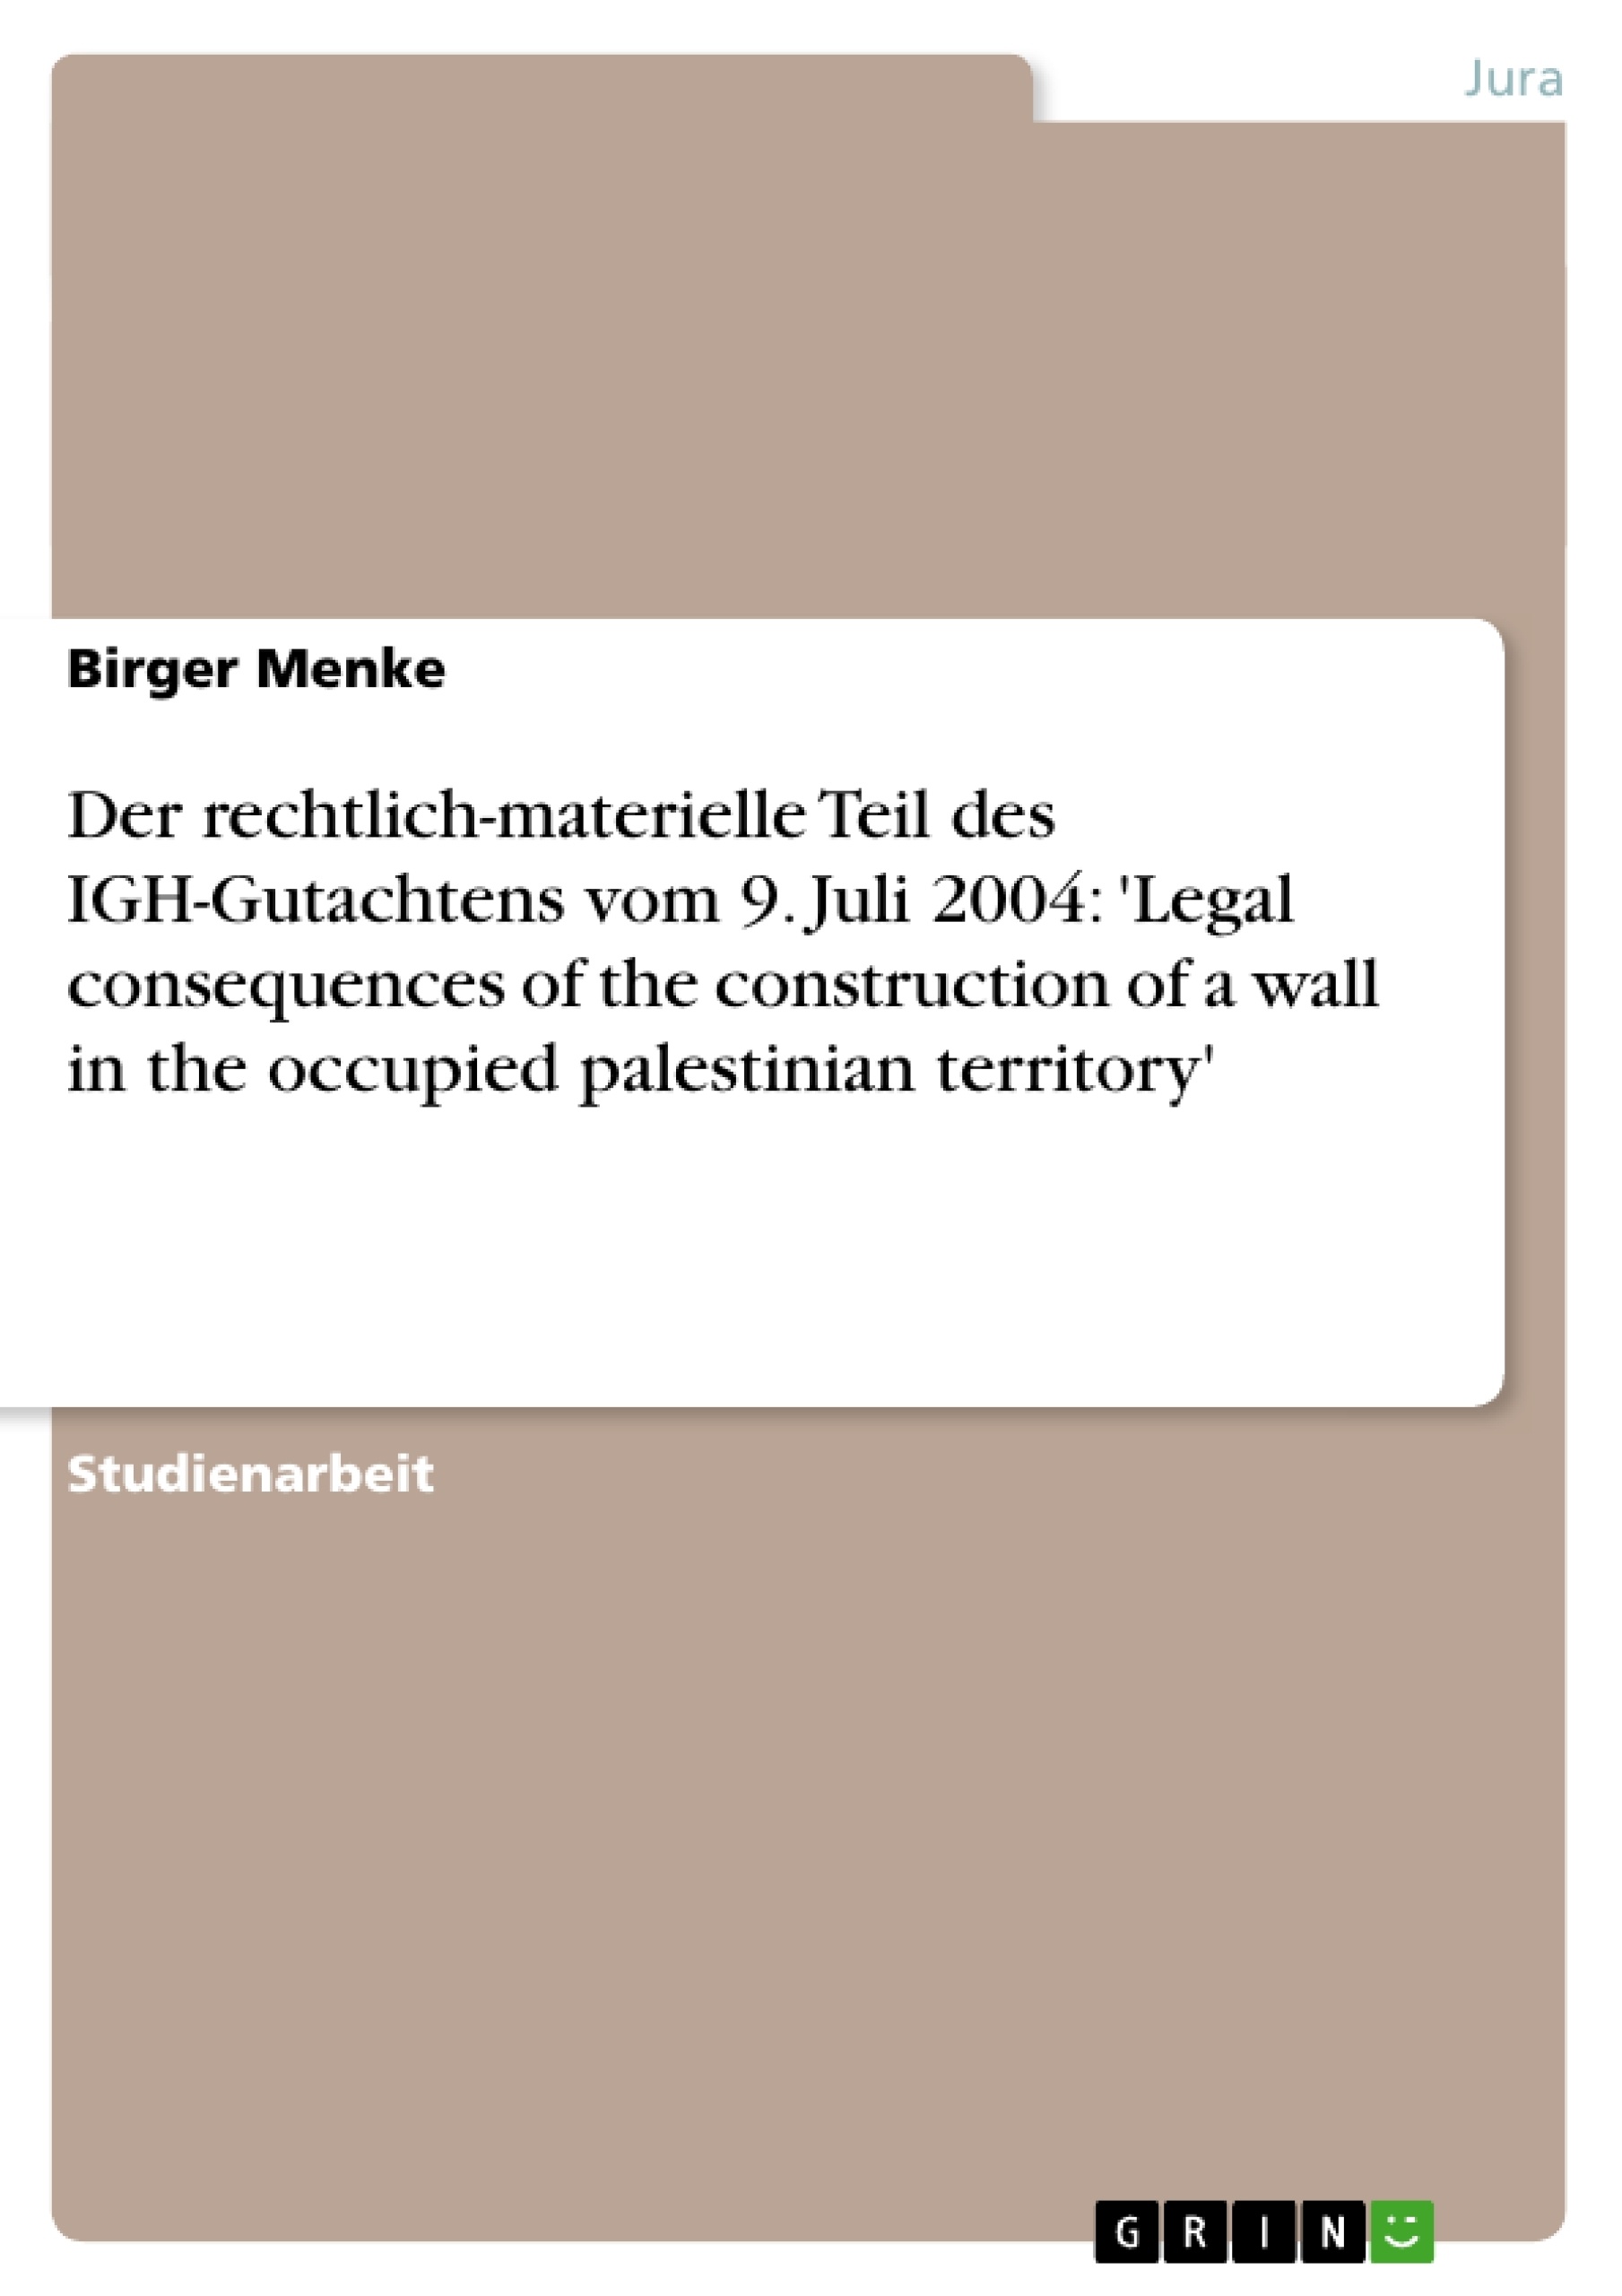 Titel: Der rechtlich-materielle Teil des IGH-Gutachtens vom 9. Juli 2004: 'Legal consequences of the construction of a wall in the occupied palestinian territory'